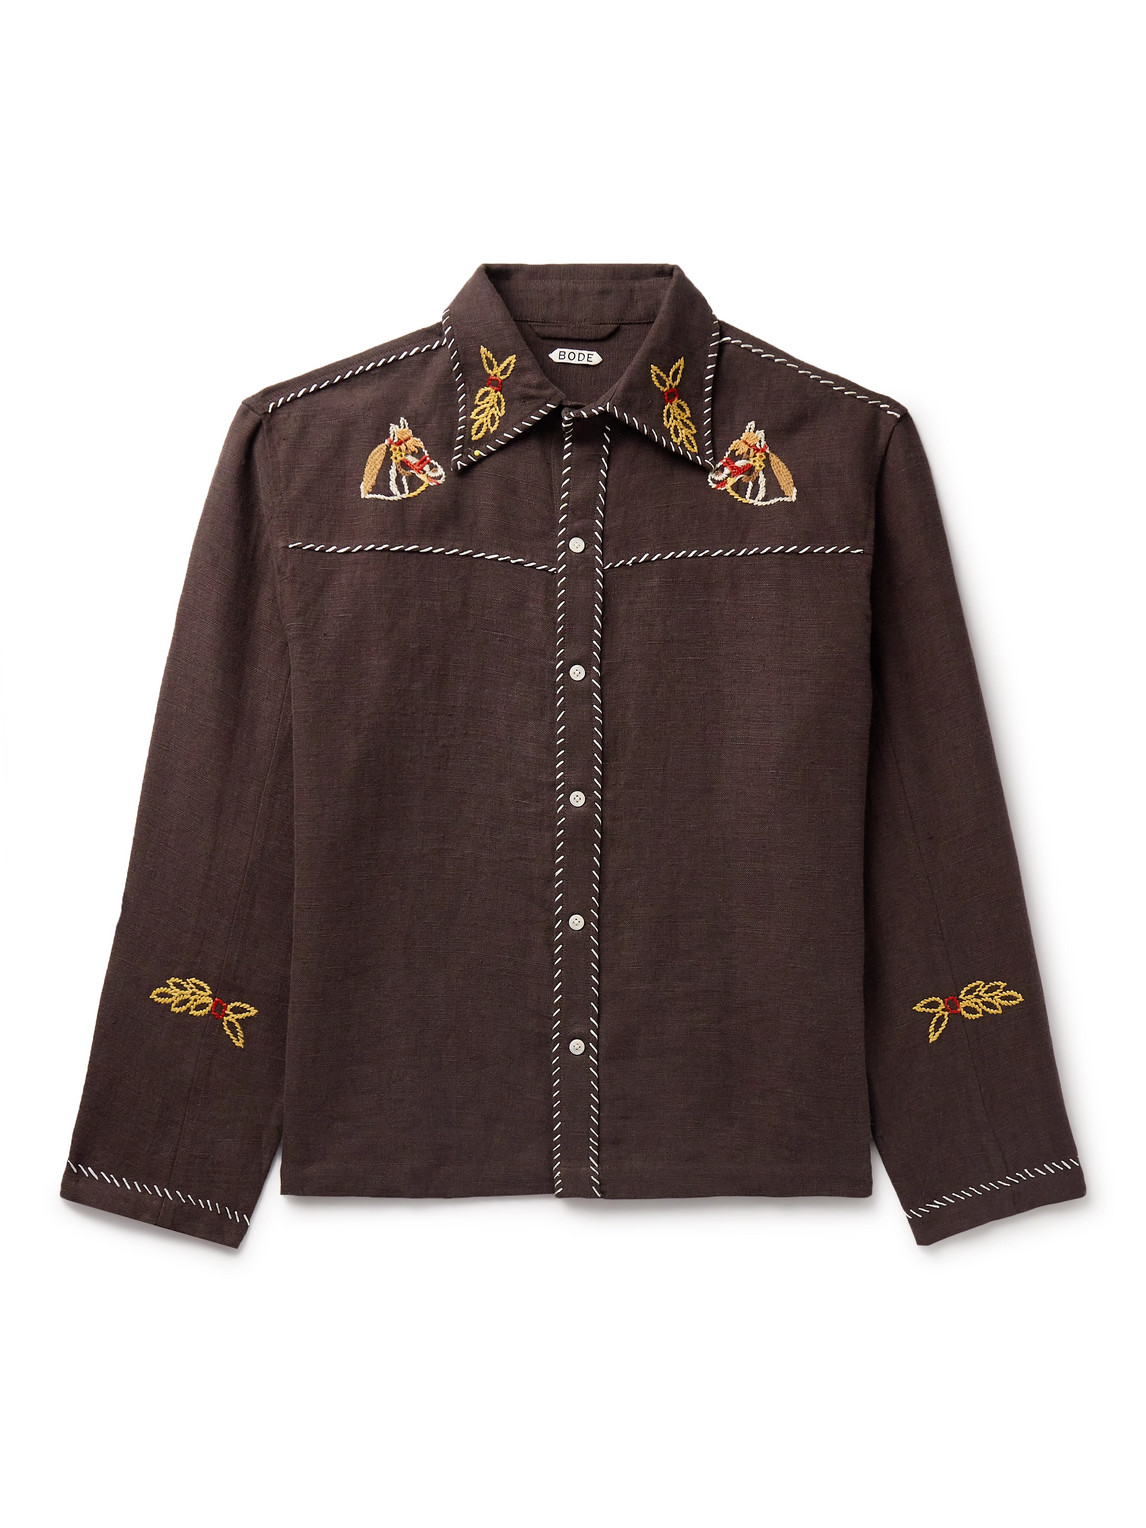 BODE SHOW PONY EMBROIDERED LINEN SHIRT